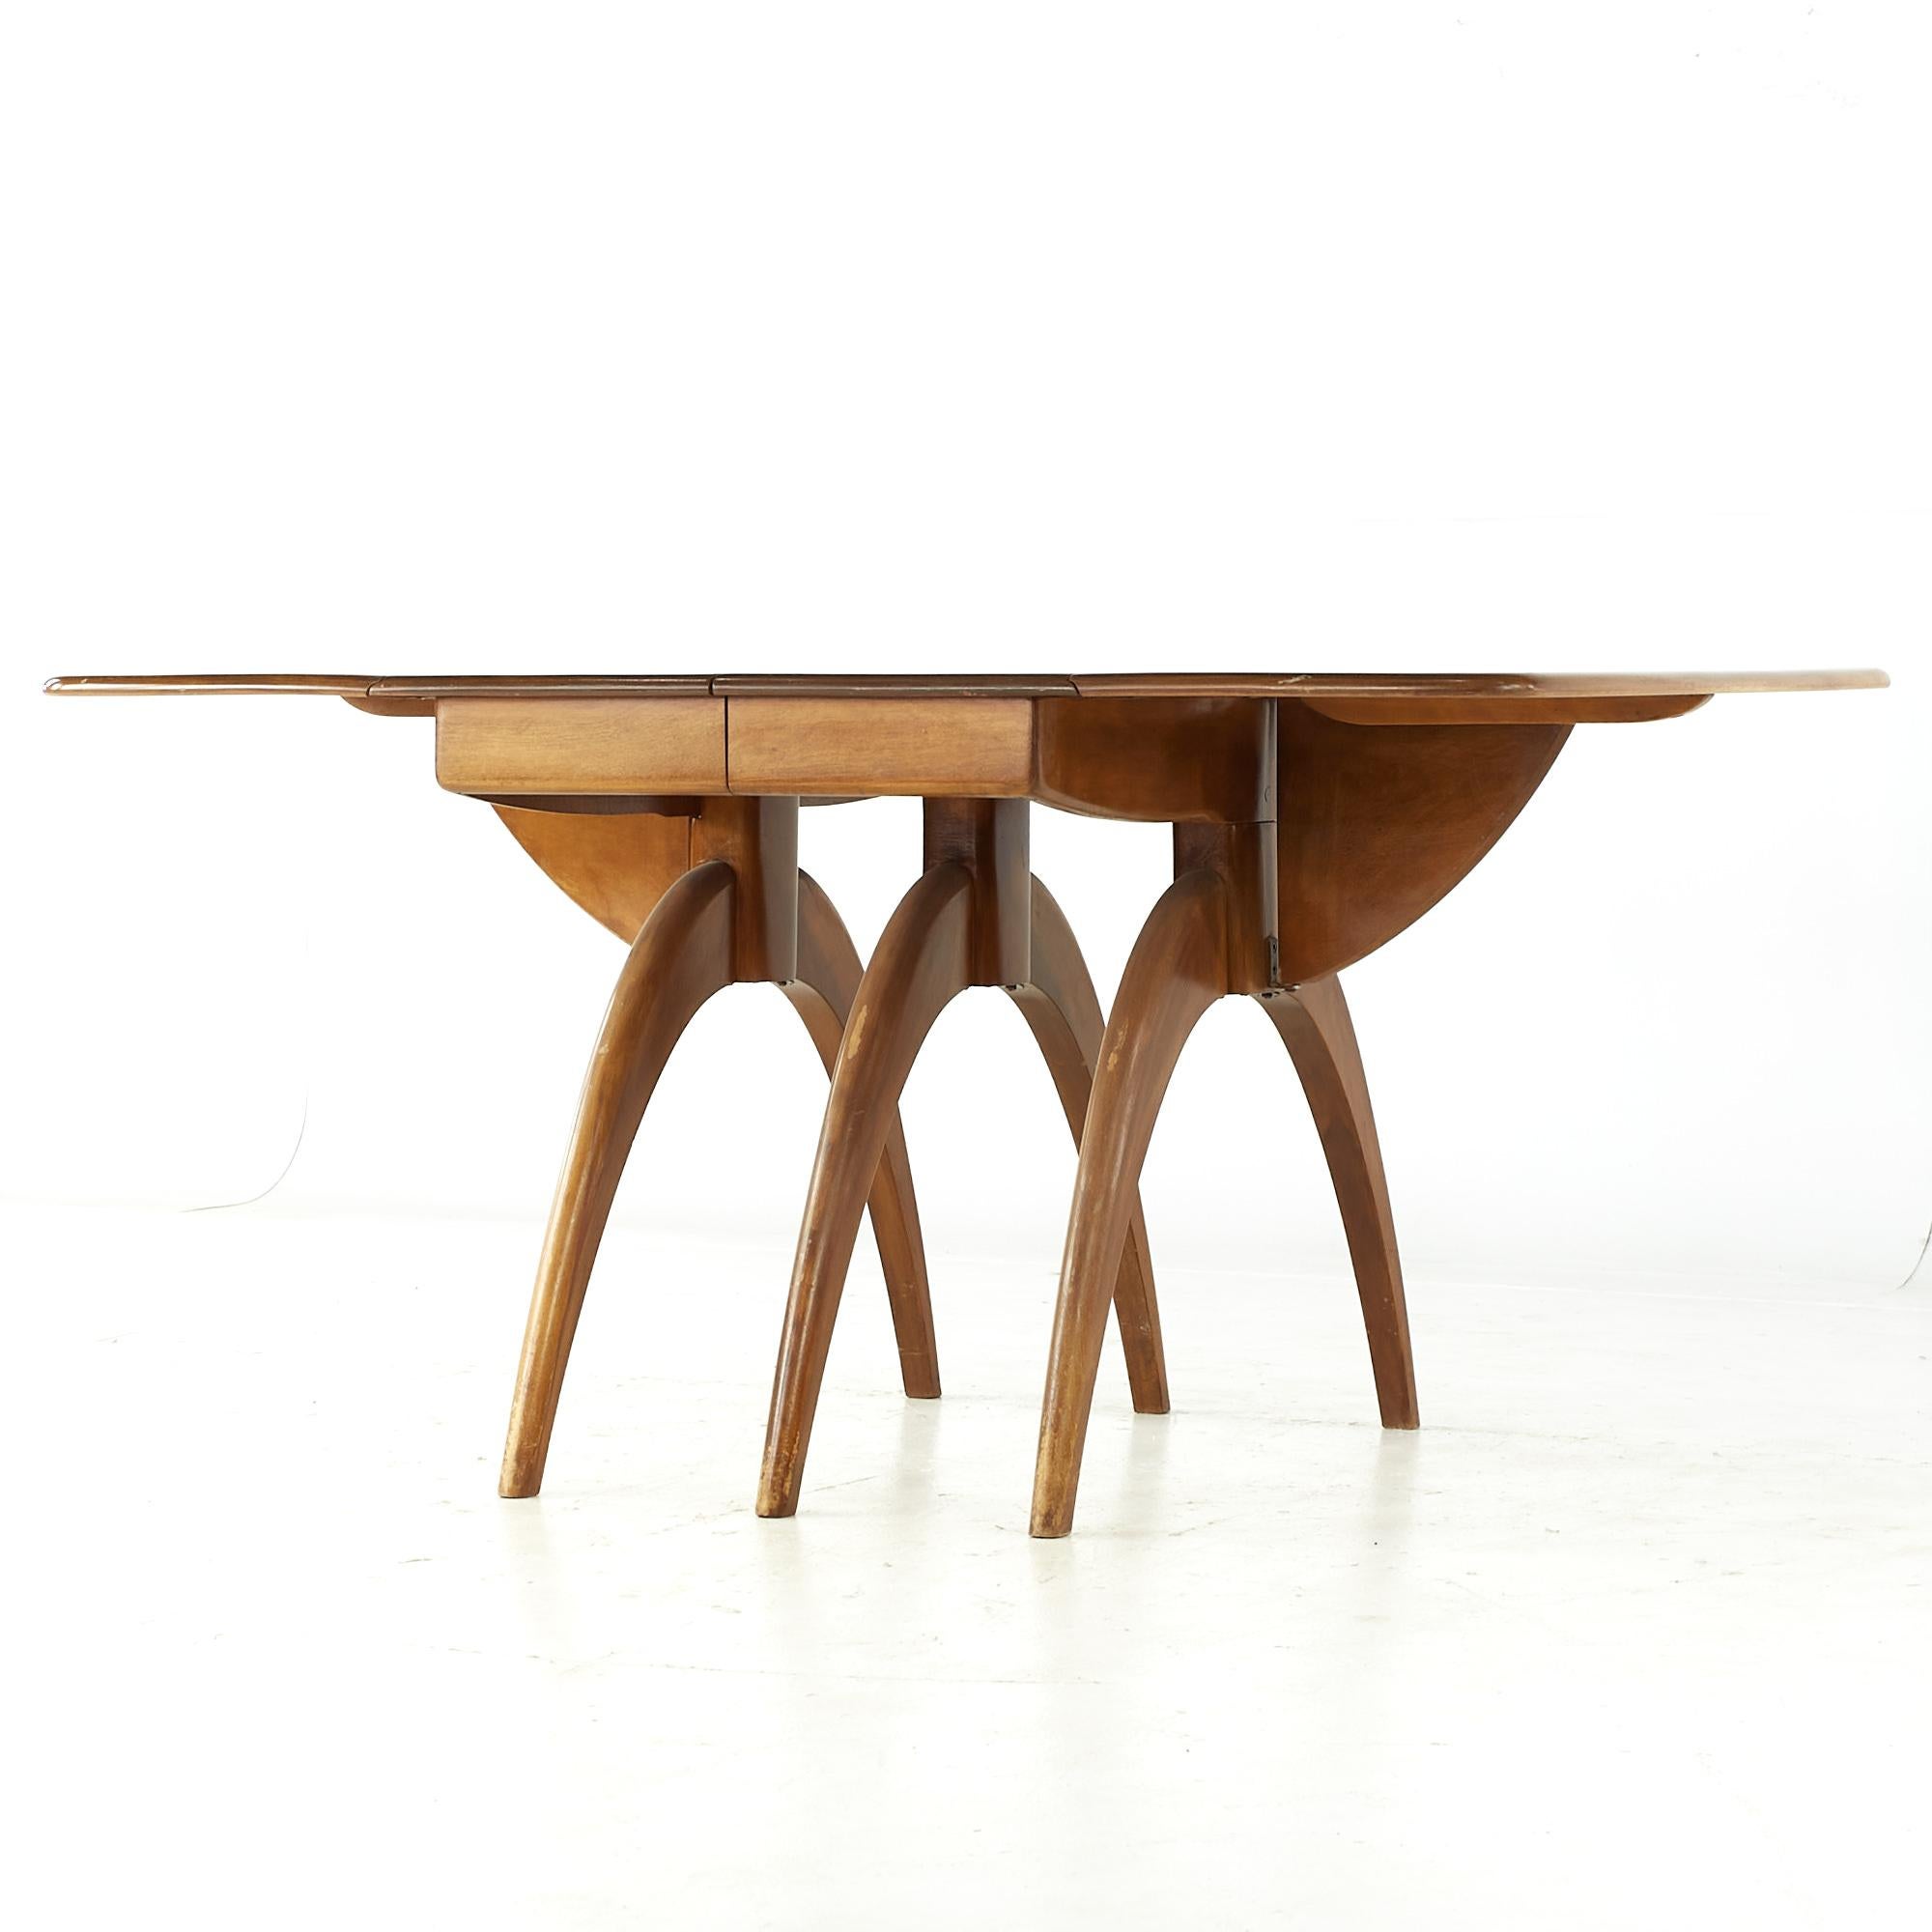 Wood Heywood Wakefield Midcentury Wishbone Expanding Dining Table with 2 Leaves For Sale